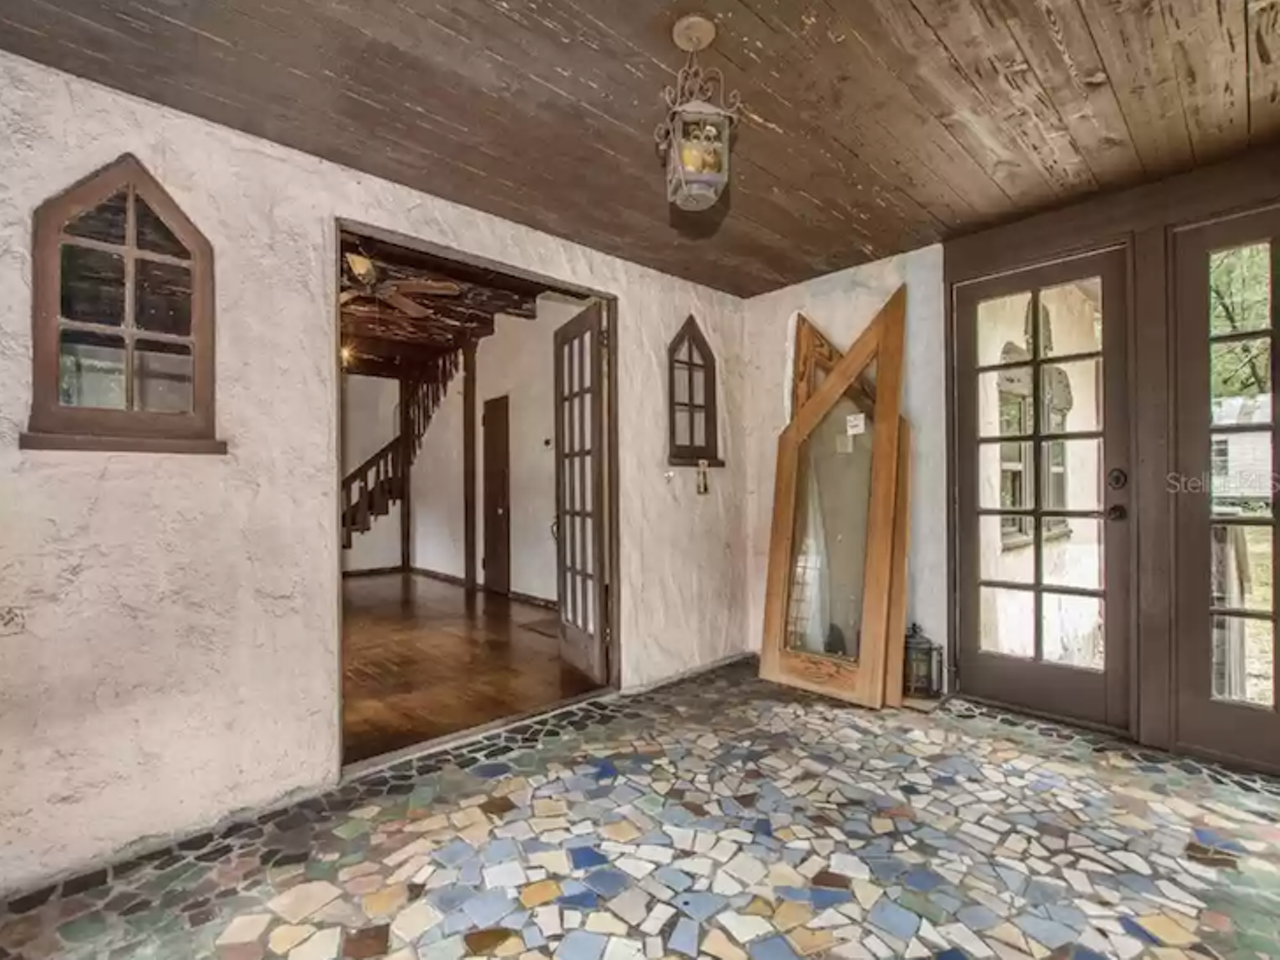 Florida's storybook 'Gingerbread House' is now on the market for $500K